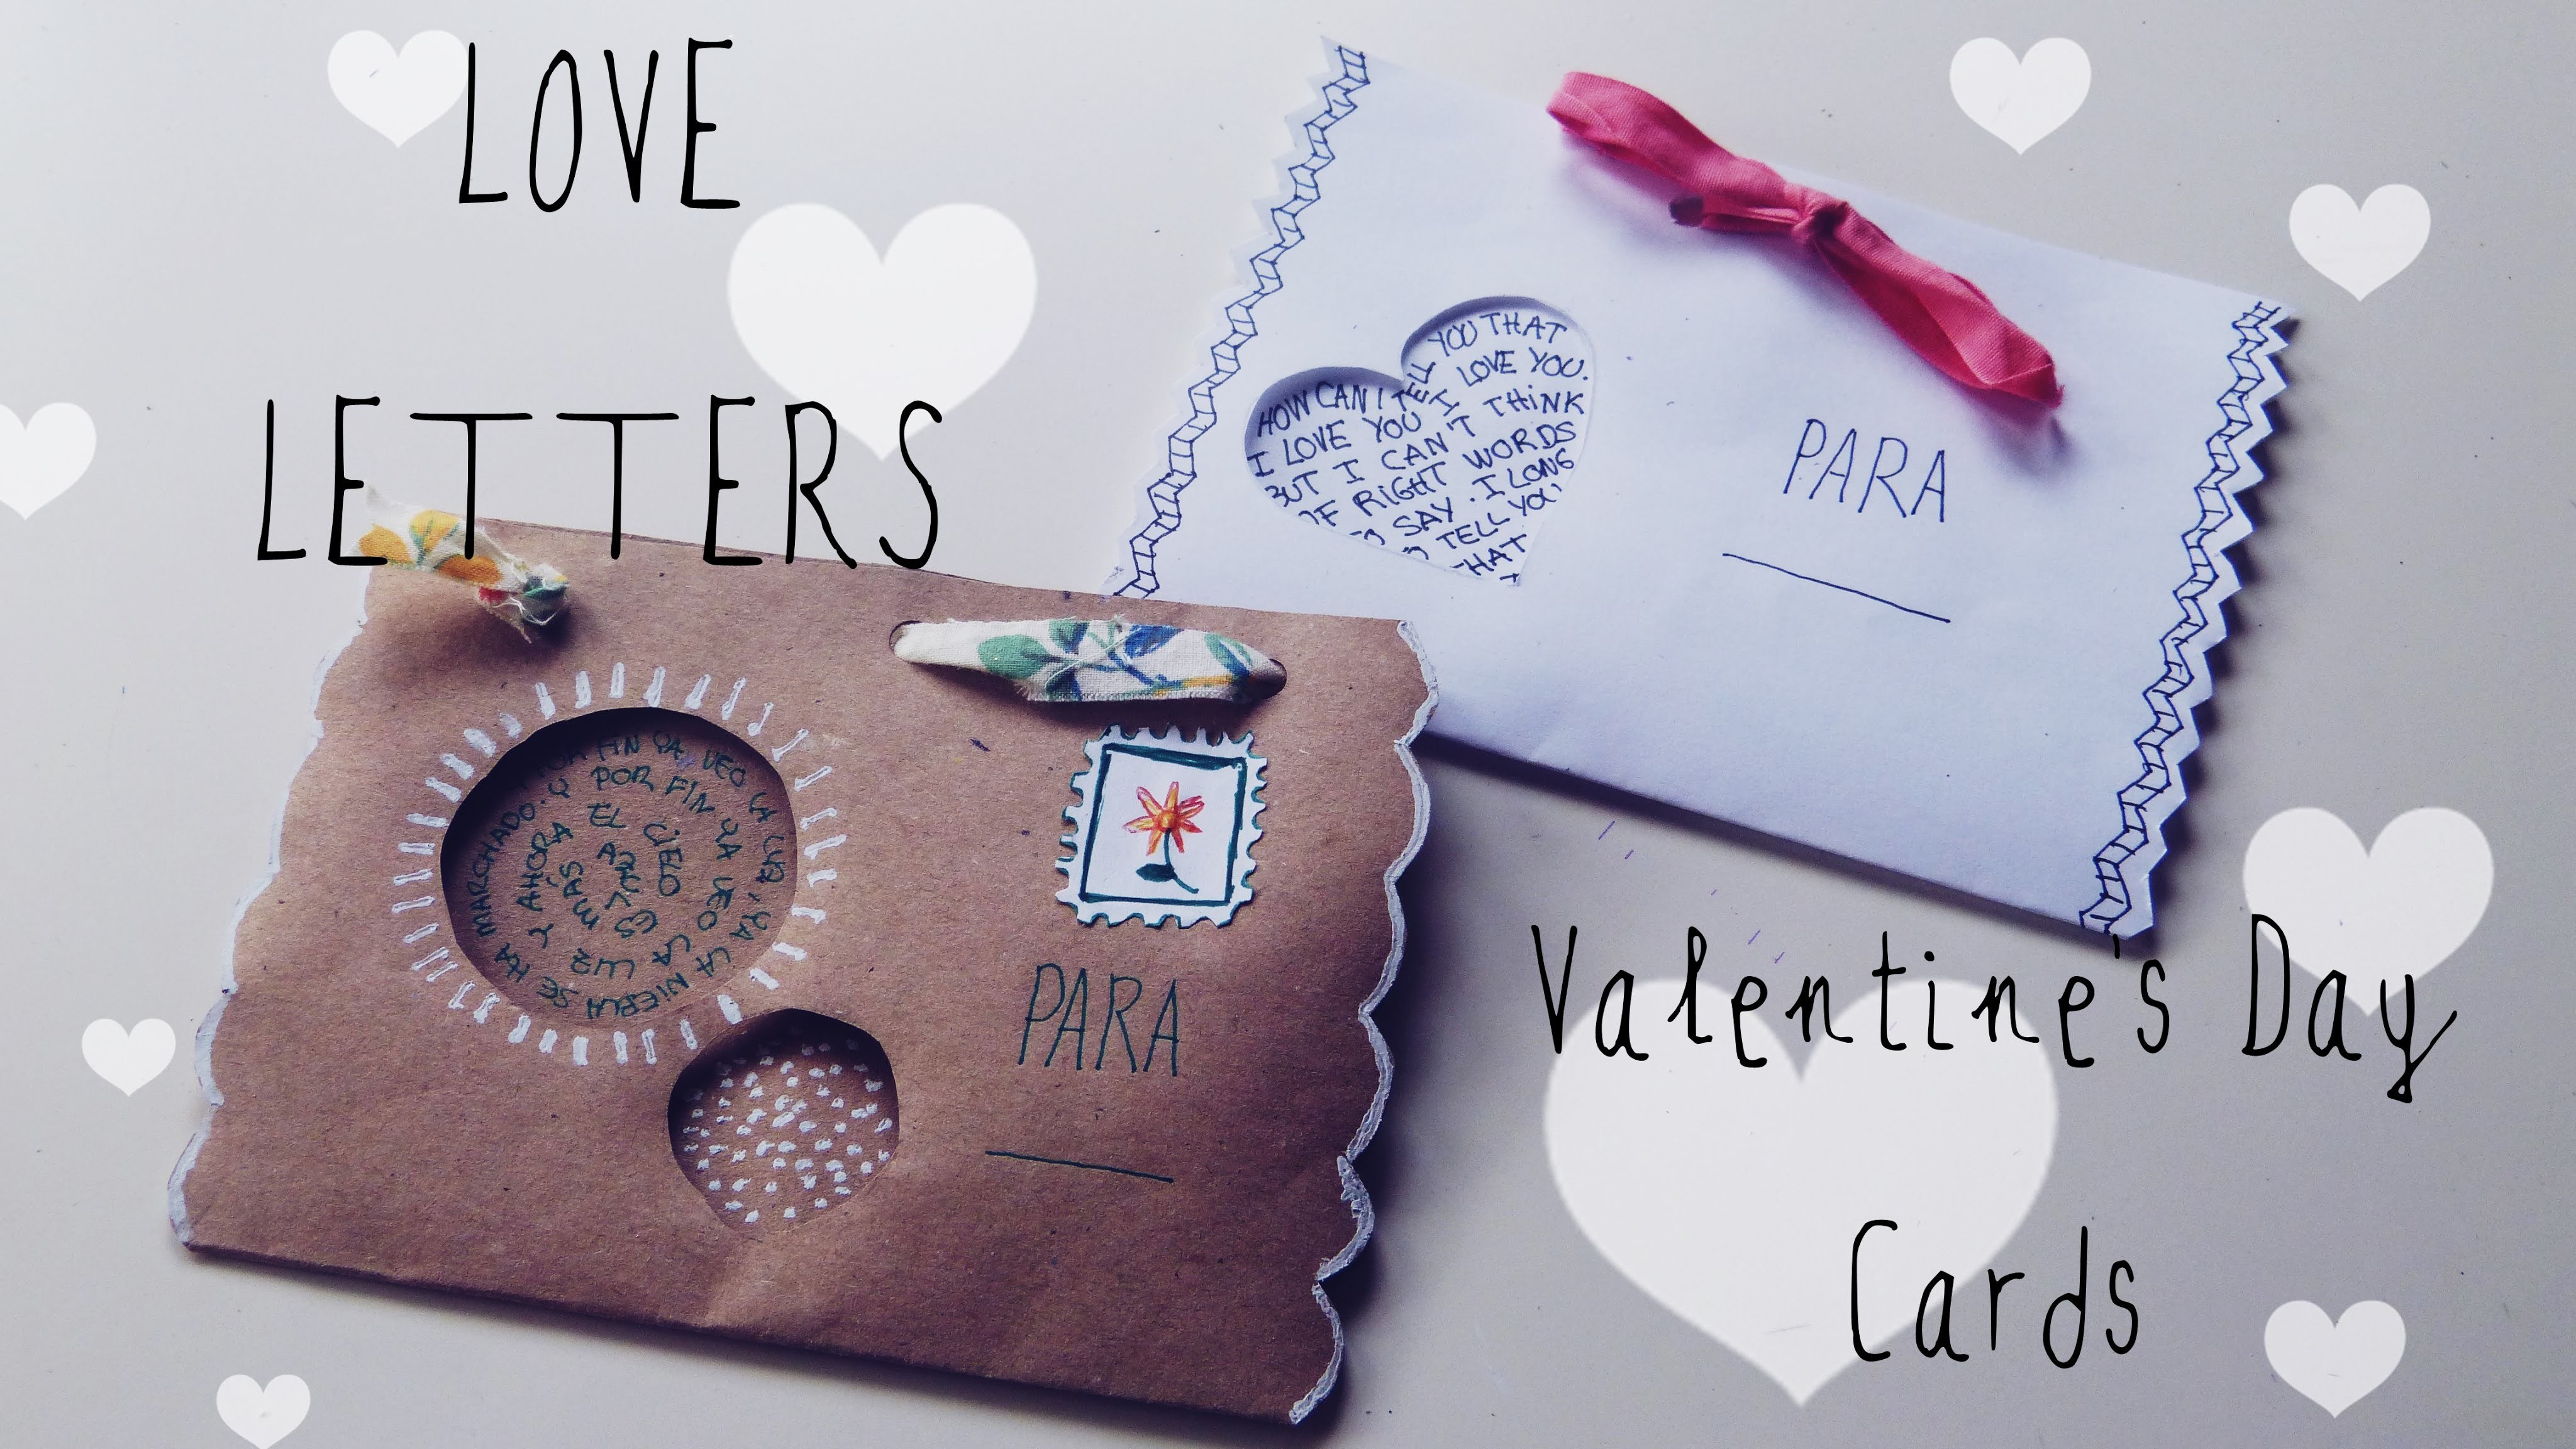 How,to,make,cute,envelopes,DIY,gifts,for,boyfriend,|Easy,Today,you´ll,learn...